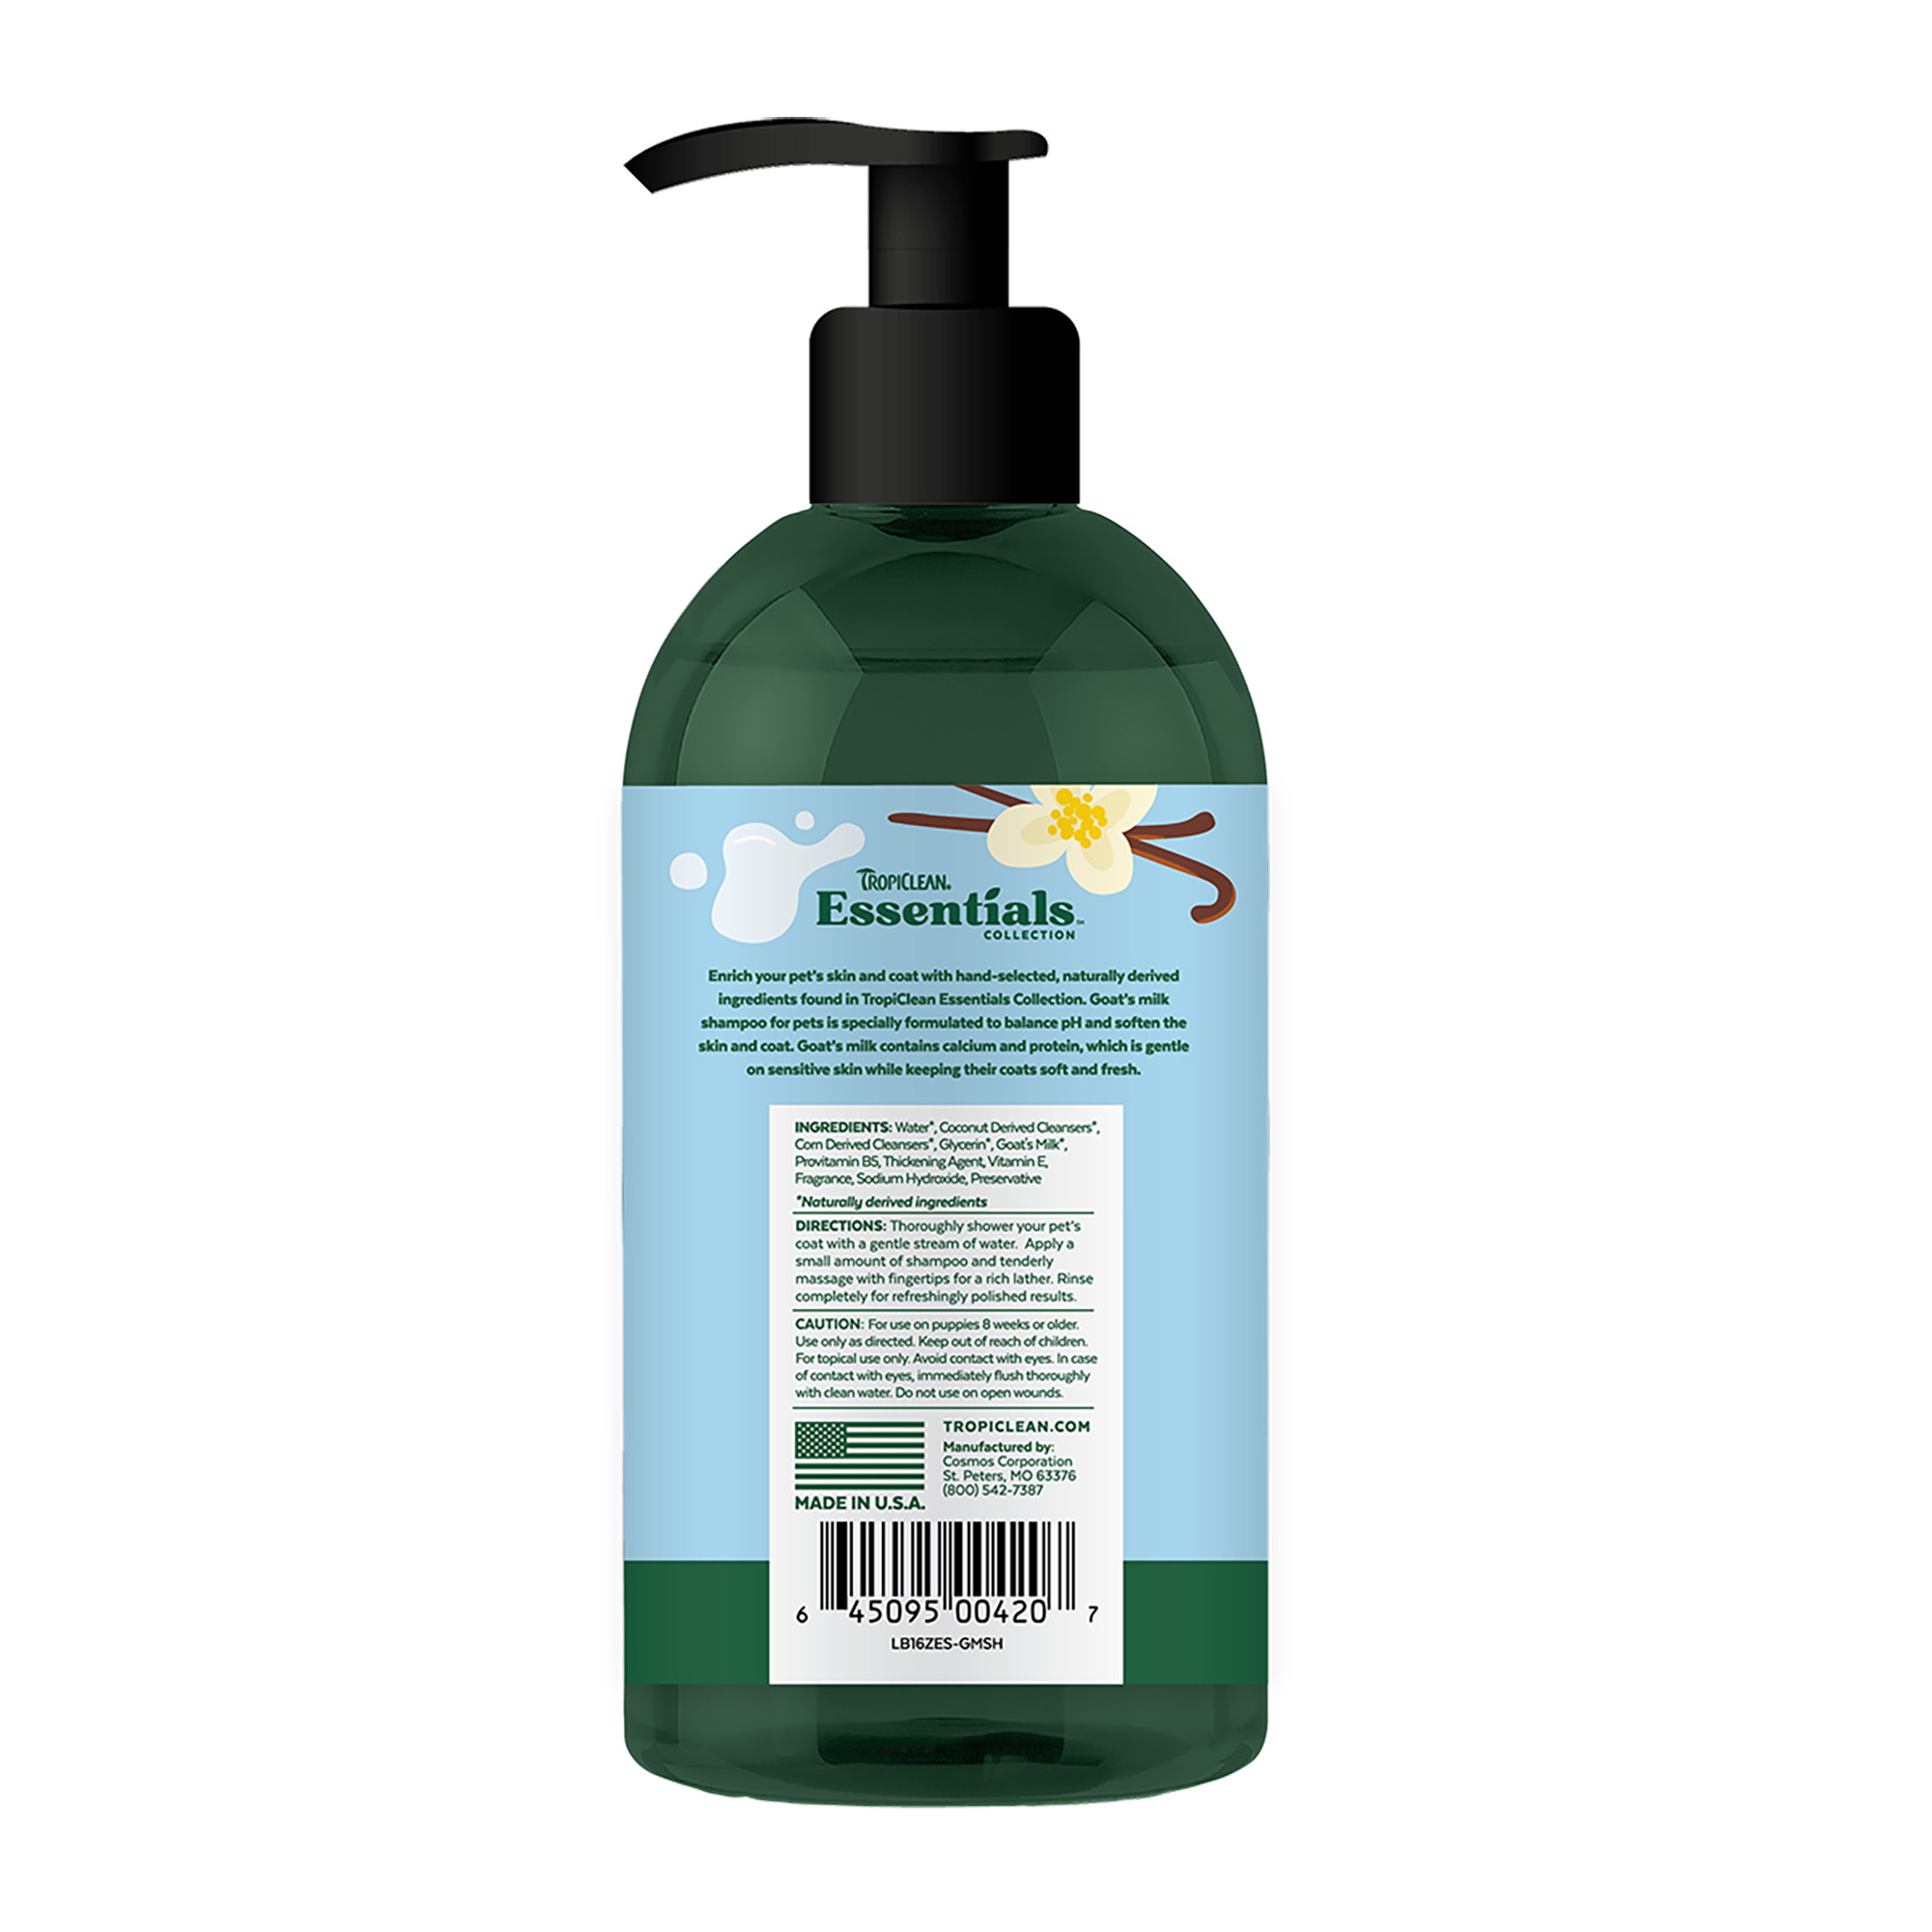 Goat’s Milk Hypoallergenic Shampoo for Dogs, Puppies and Cats